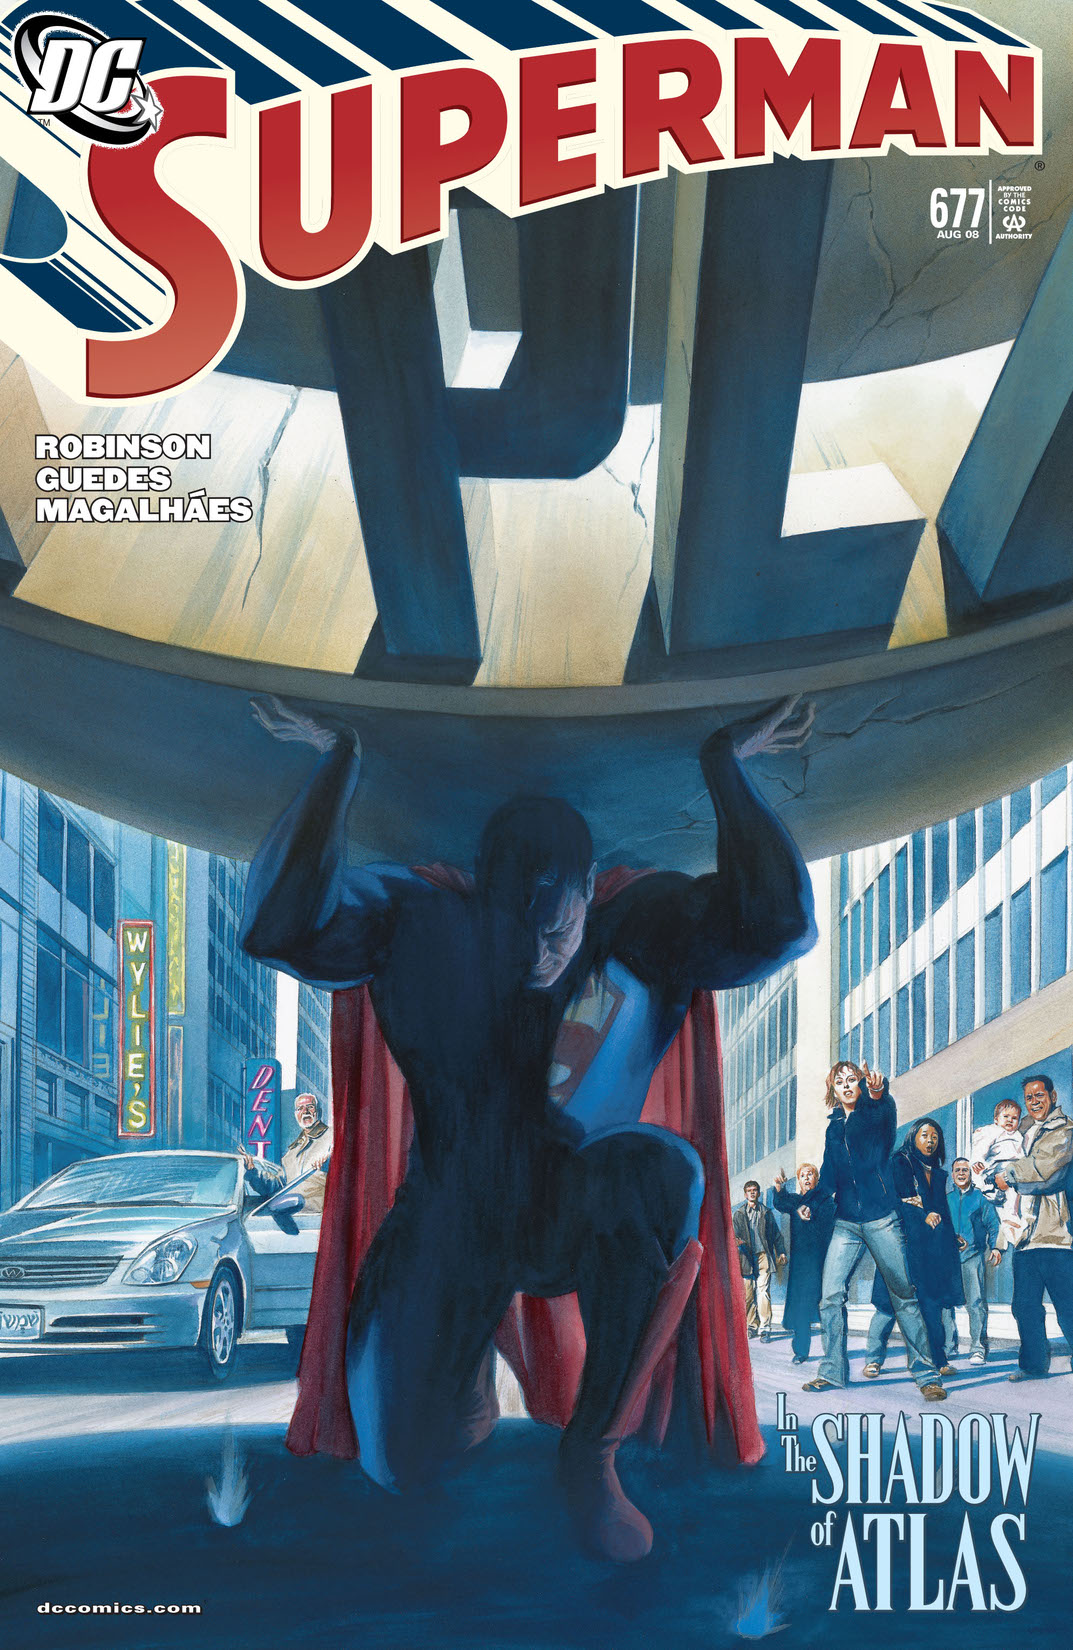 Superman (2006-) #677 preview images